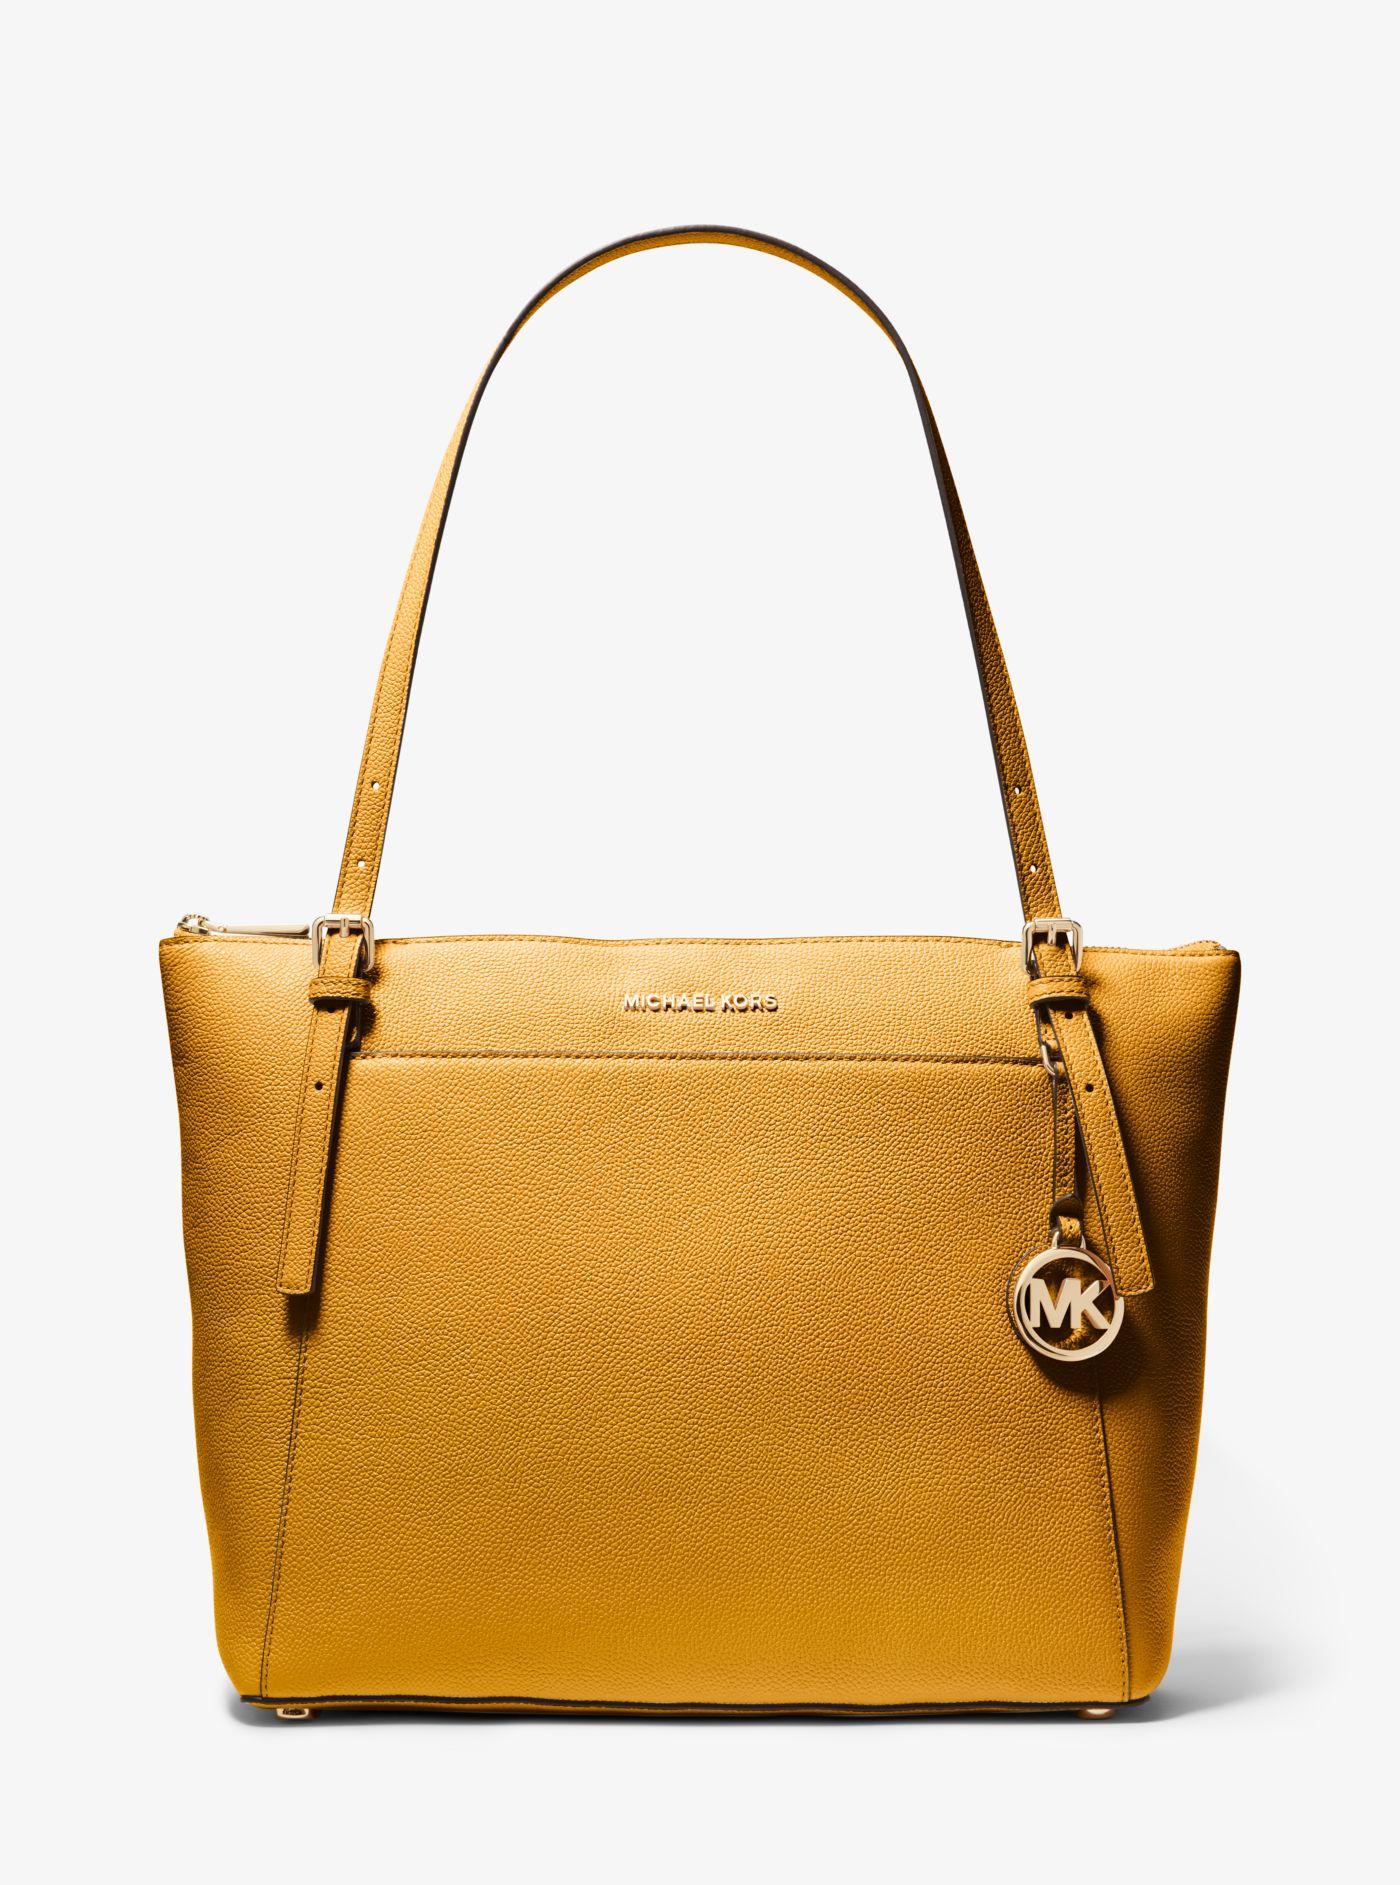 Michael Kors Voyager Large Pebbled Leather Top-zip Tote Bag in Yellow | Lyst